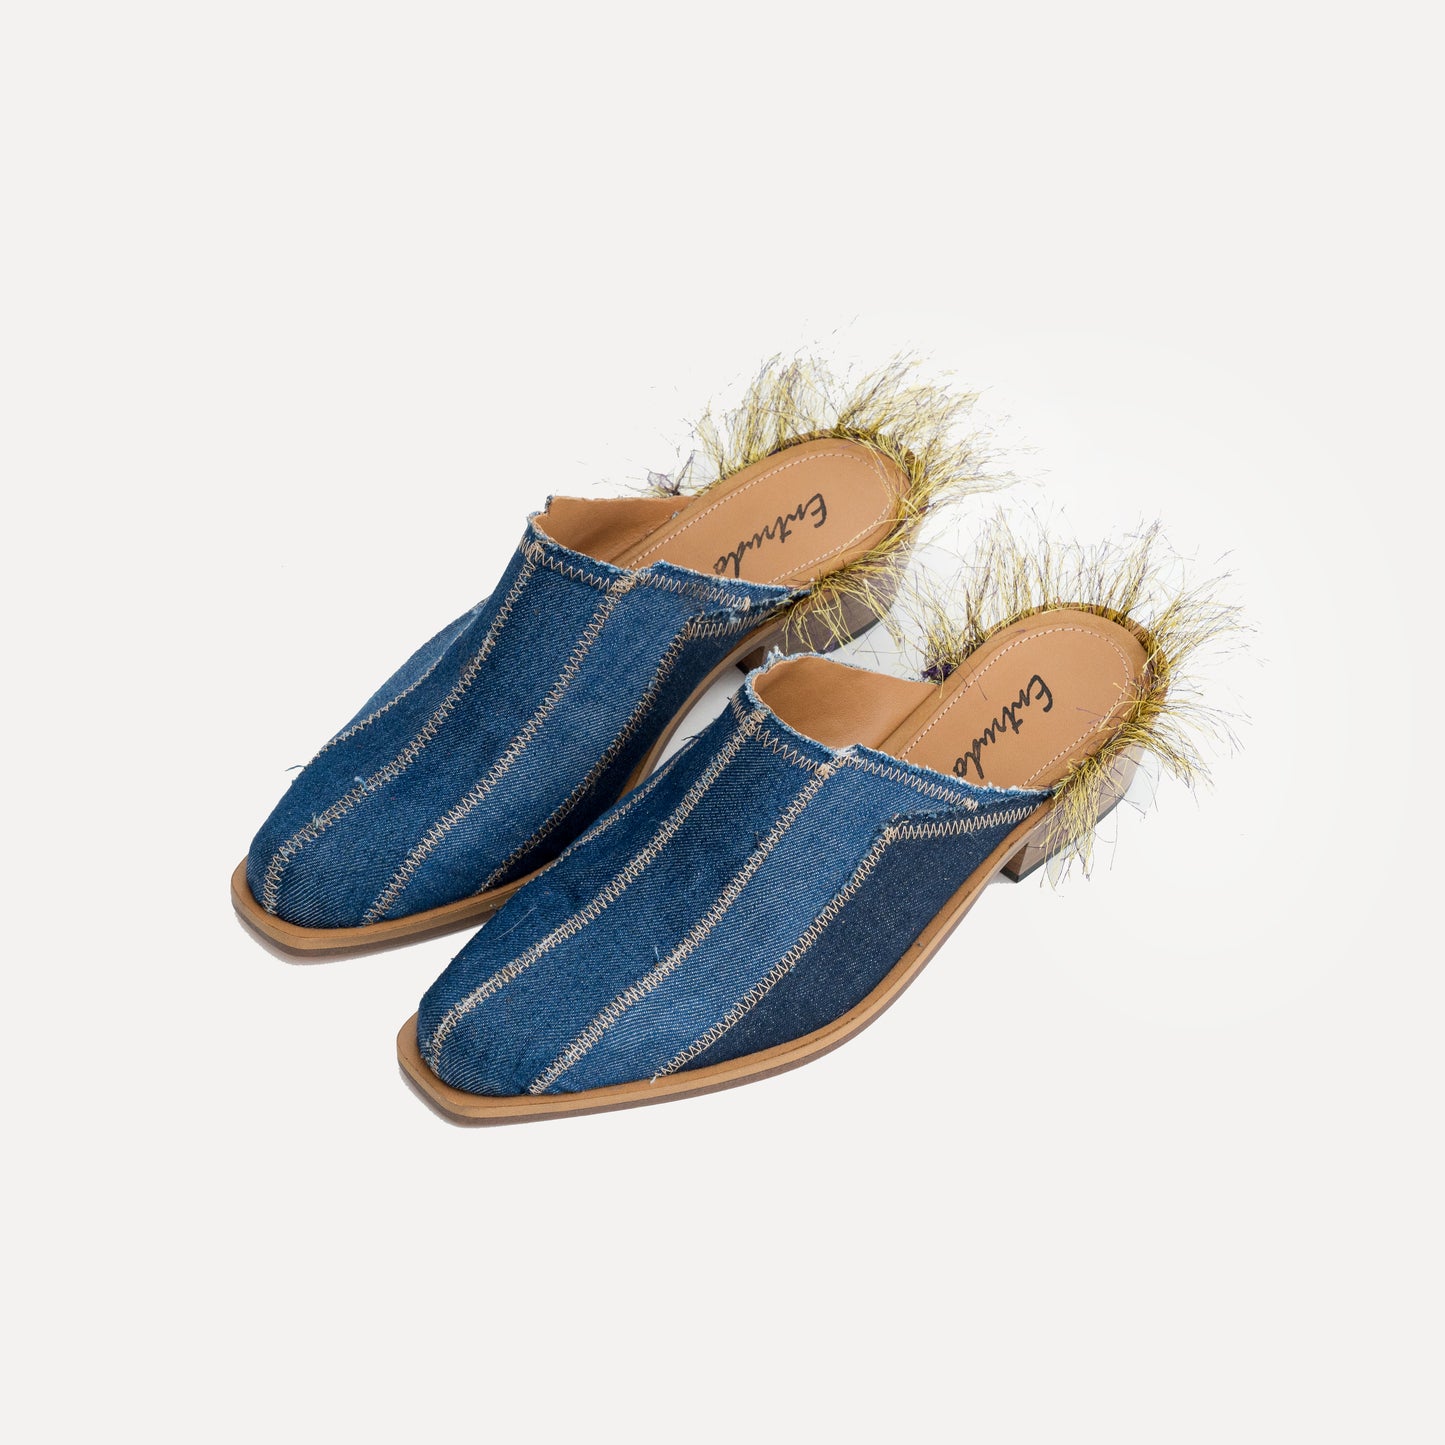 Penude - denim mules with colored thread on the heel